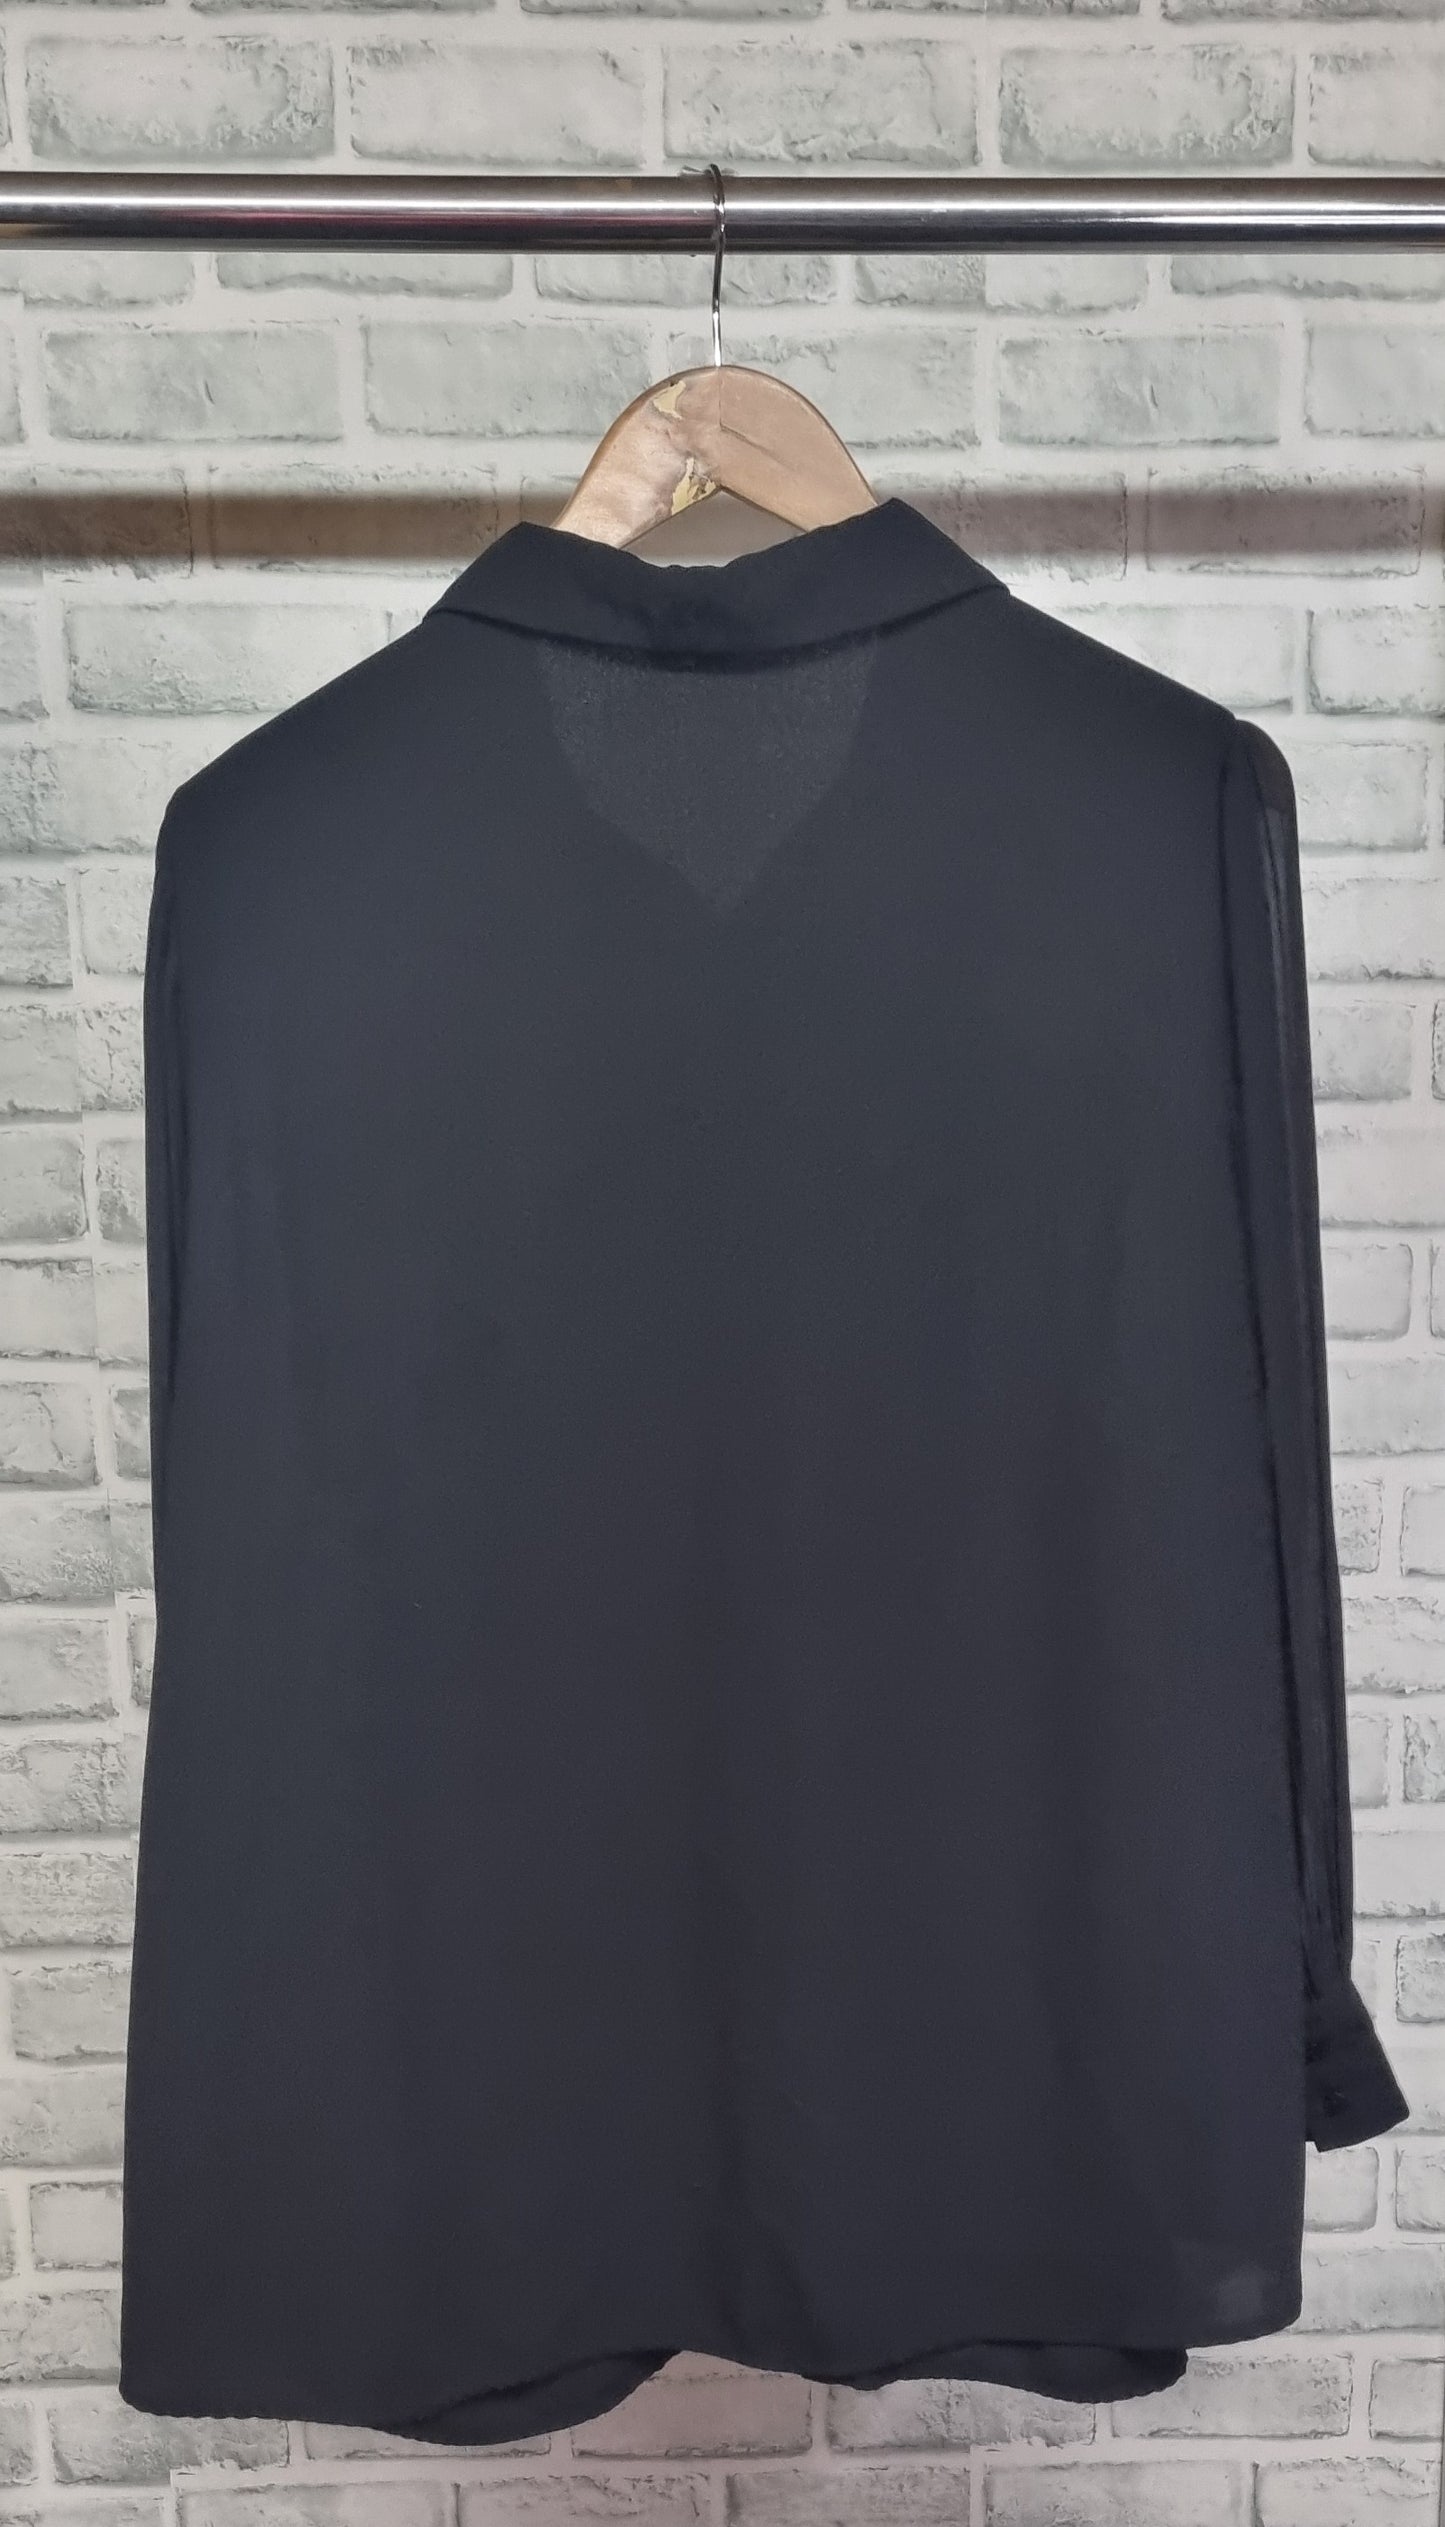 Adrianna Papell Black Blouse Size XL